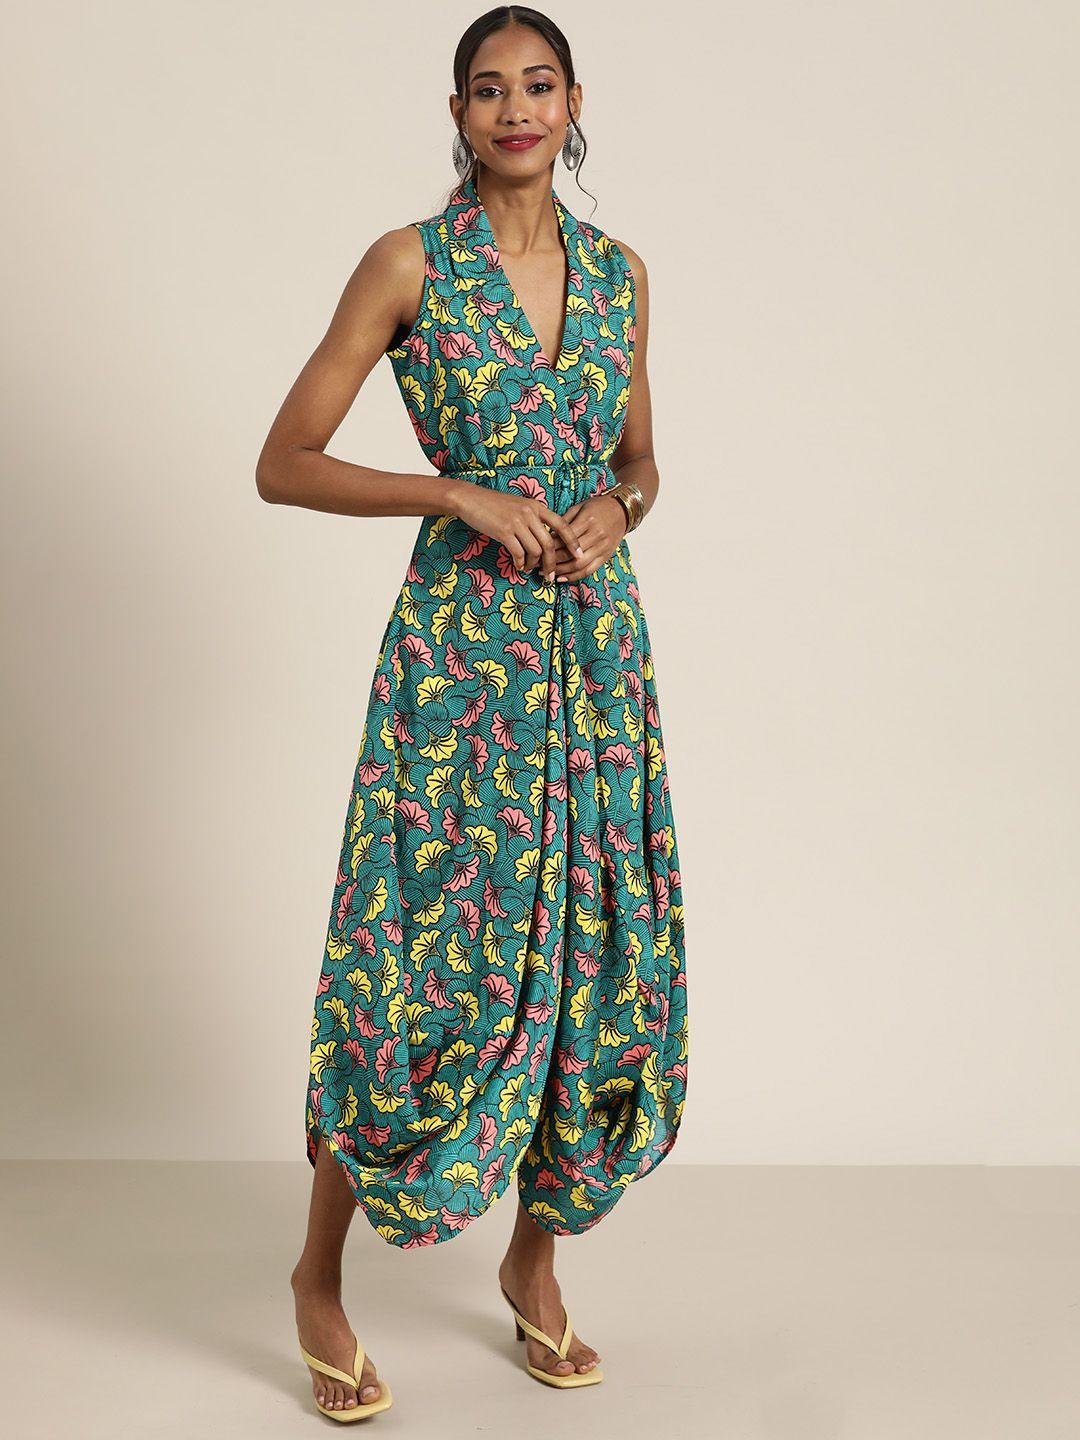 shae by sassafras teal & yellow floral a-line maxi dress